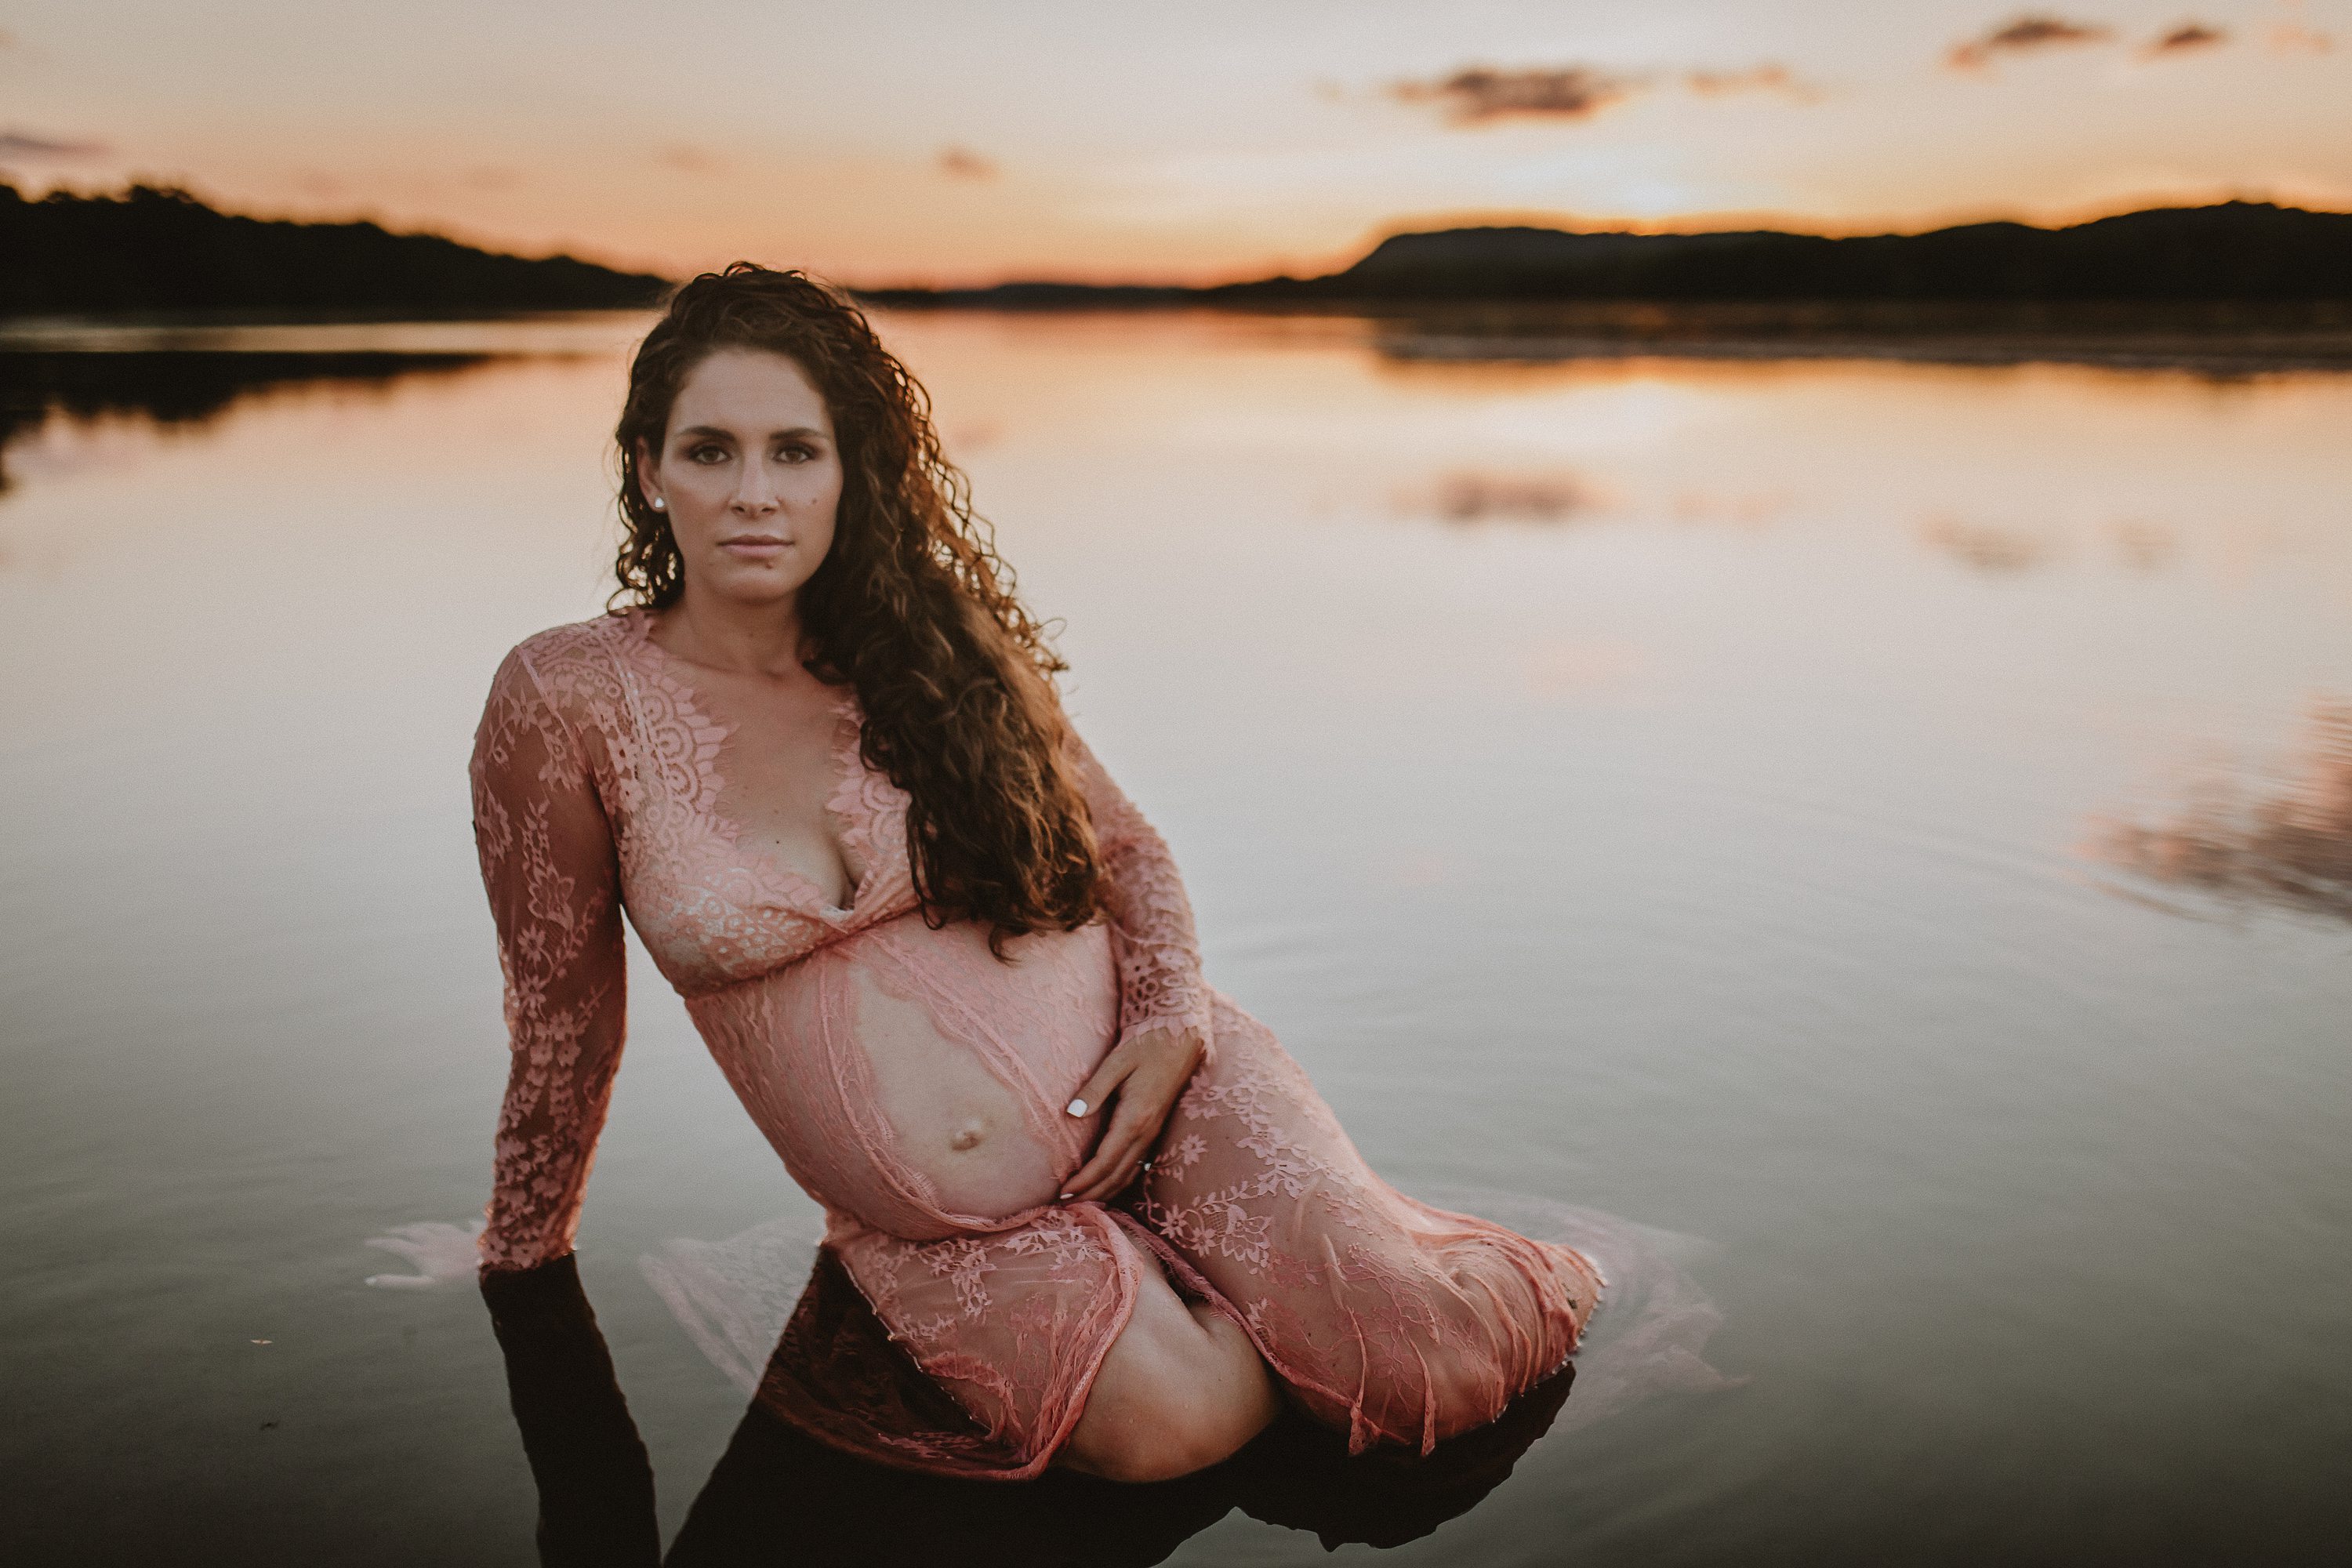 Maternity session by the river,Pregnant mother in a lace gown by the beach,PPregnant mother in a peach, lace gown by the water.,Pregnant mother in a long, lace gown holding her belly.,Pregnant woman in a peach gown near the river at sunset.